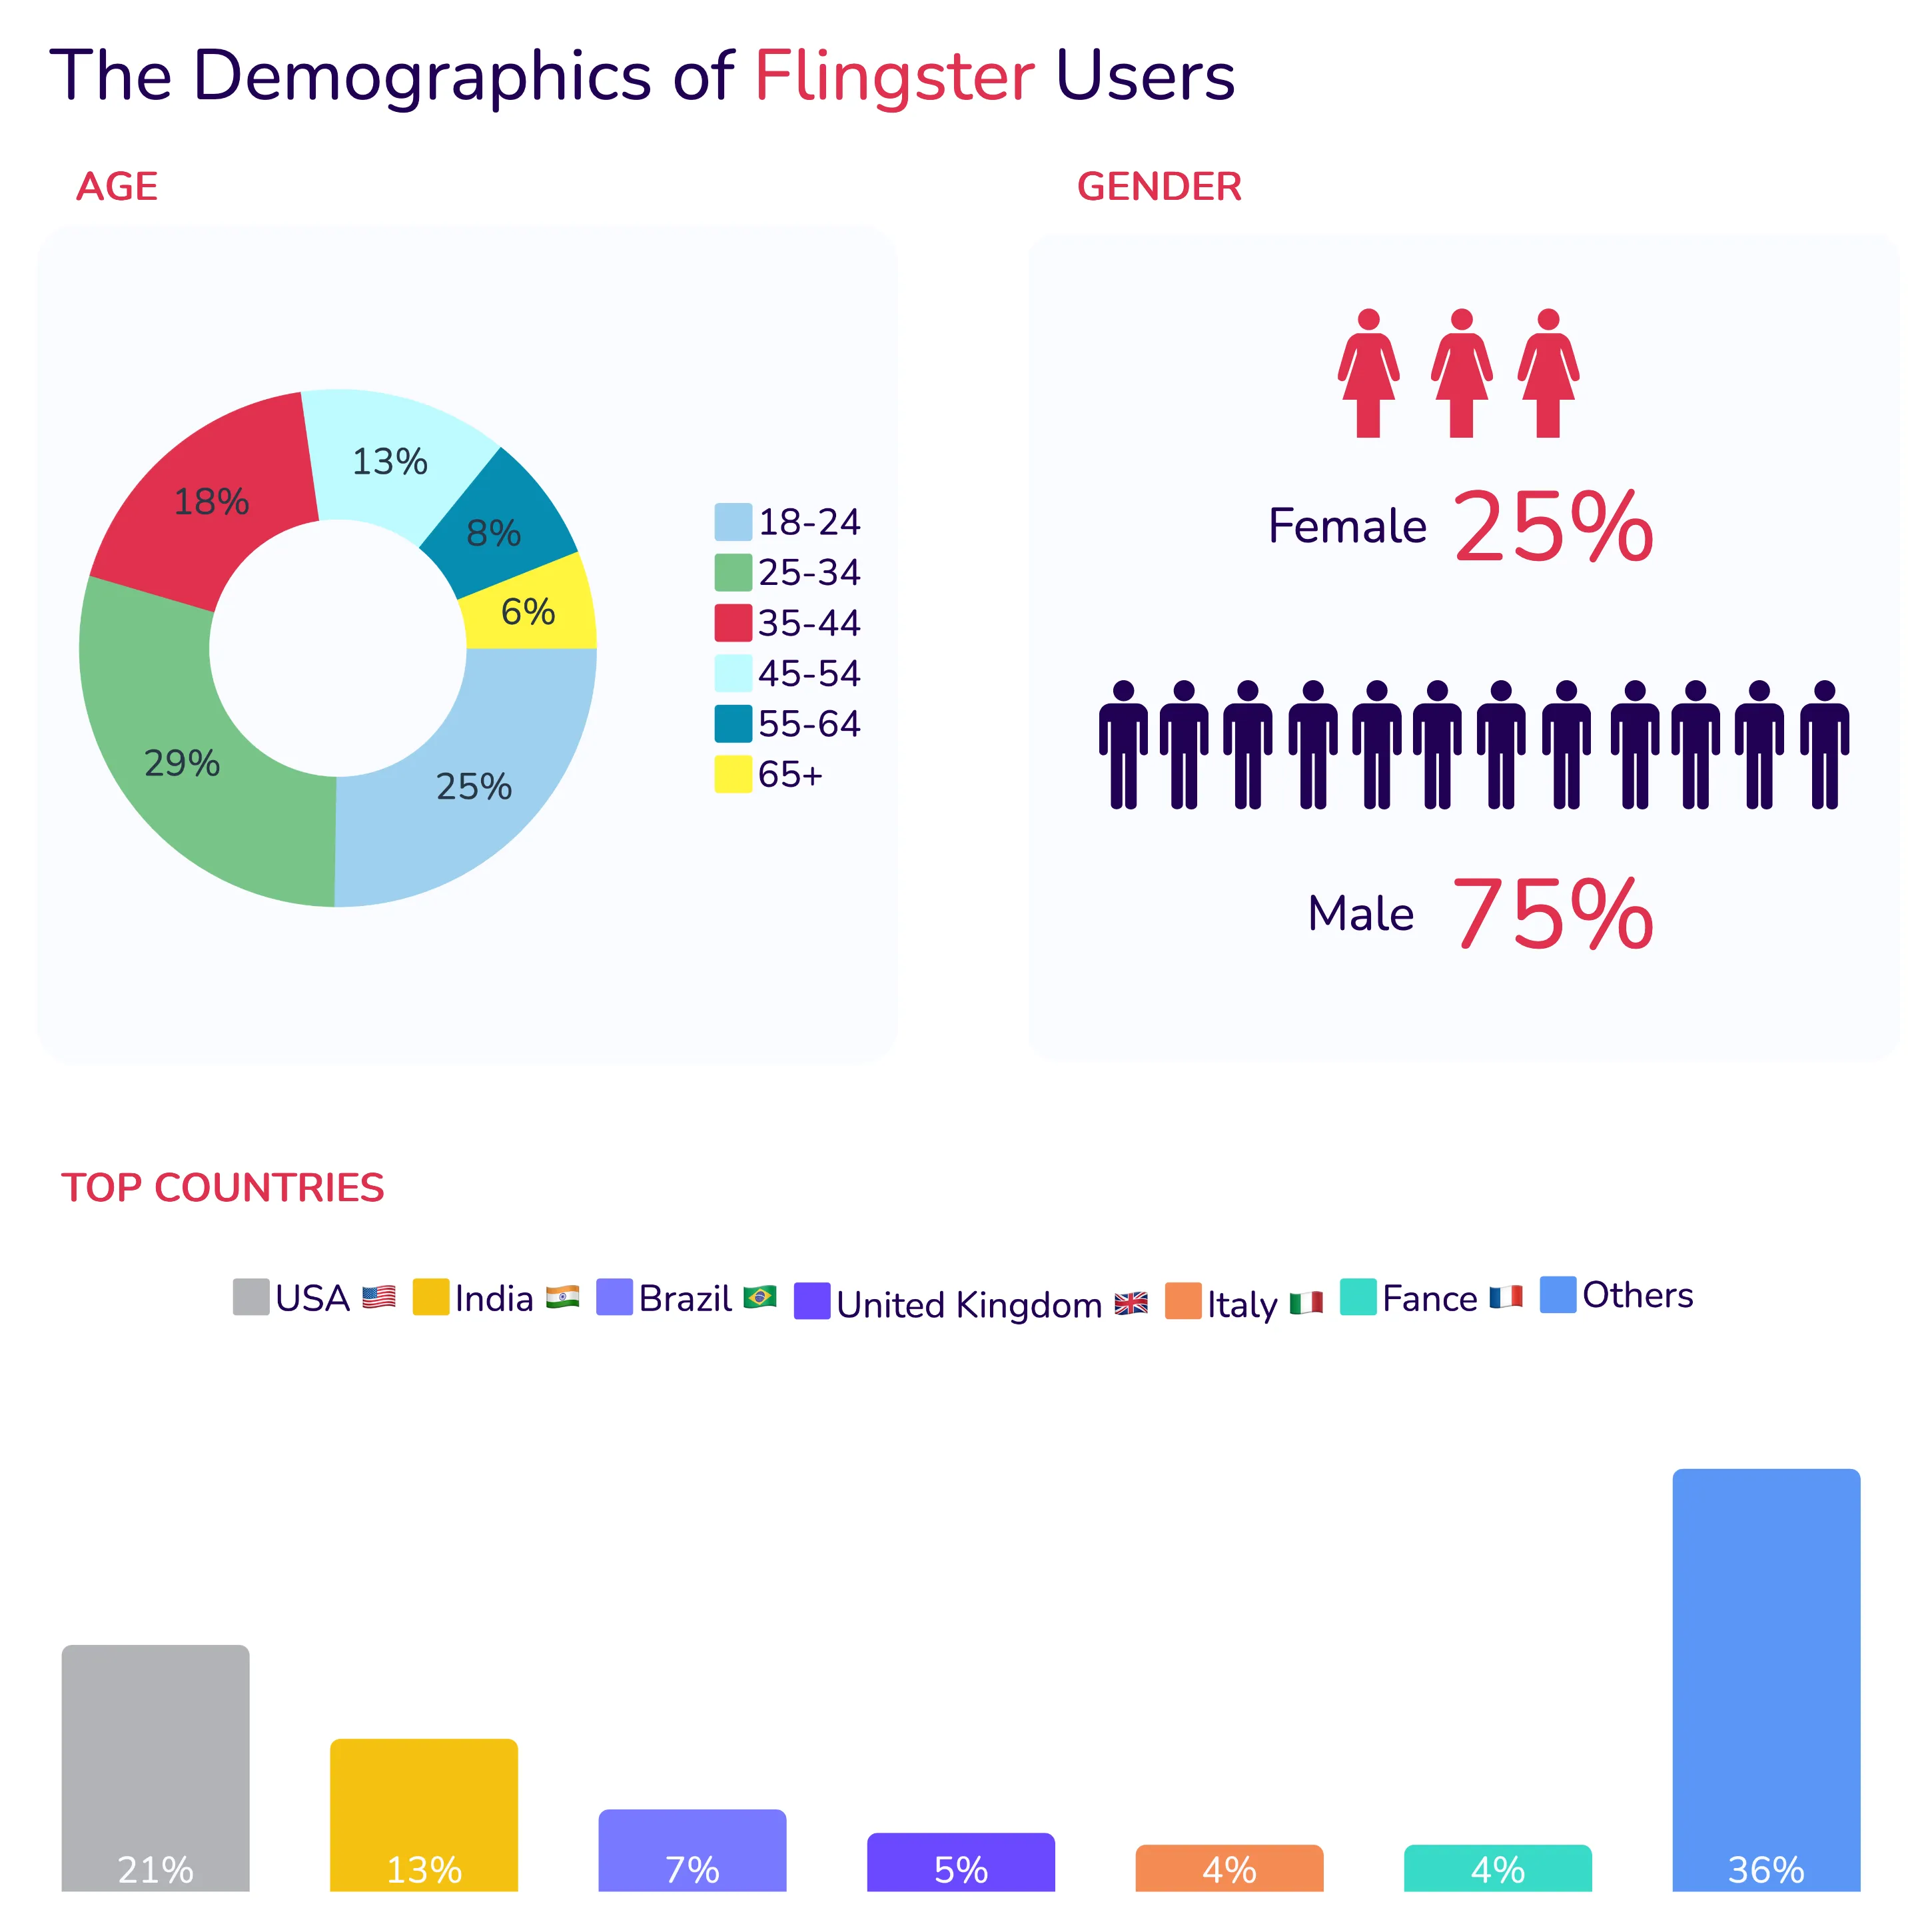 Flingster seems to attract mostly male users, with men making up 75% of the user base compared to just 25% female users. The largest age group is 25-34 year olds at 29%, followed by 18-24 year olds at 25%. Together these younger adults under 35 make up over half of all Flingster users. Usage declines in the older age brackets, with only 6% of users over age 65. Looking at geography, the United States accounts for the most users at 21%, followed by India at 13% and Brazil at 7%. The UK, Italy, and France each represent 4% of the user base. Over a third of users (36%) come from other unidentified countries.